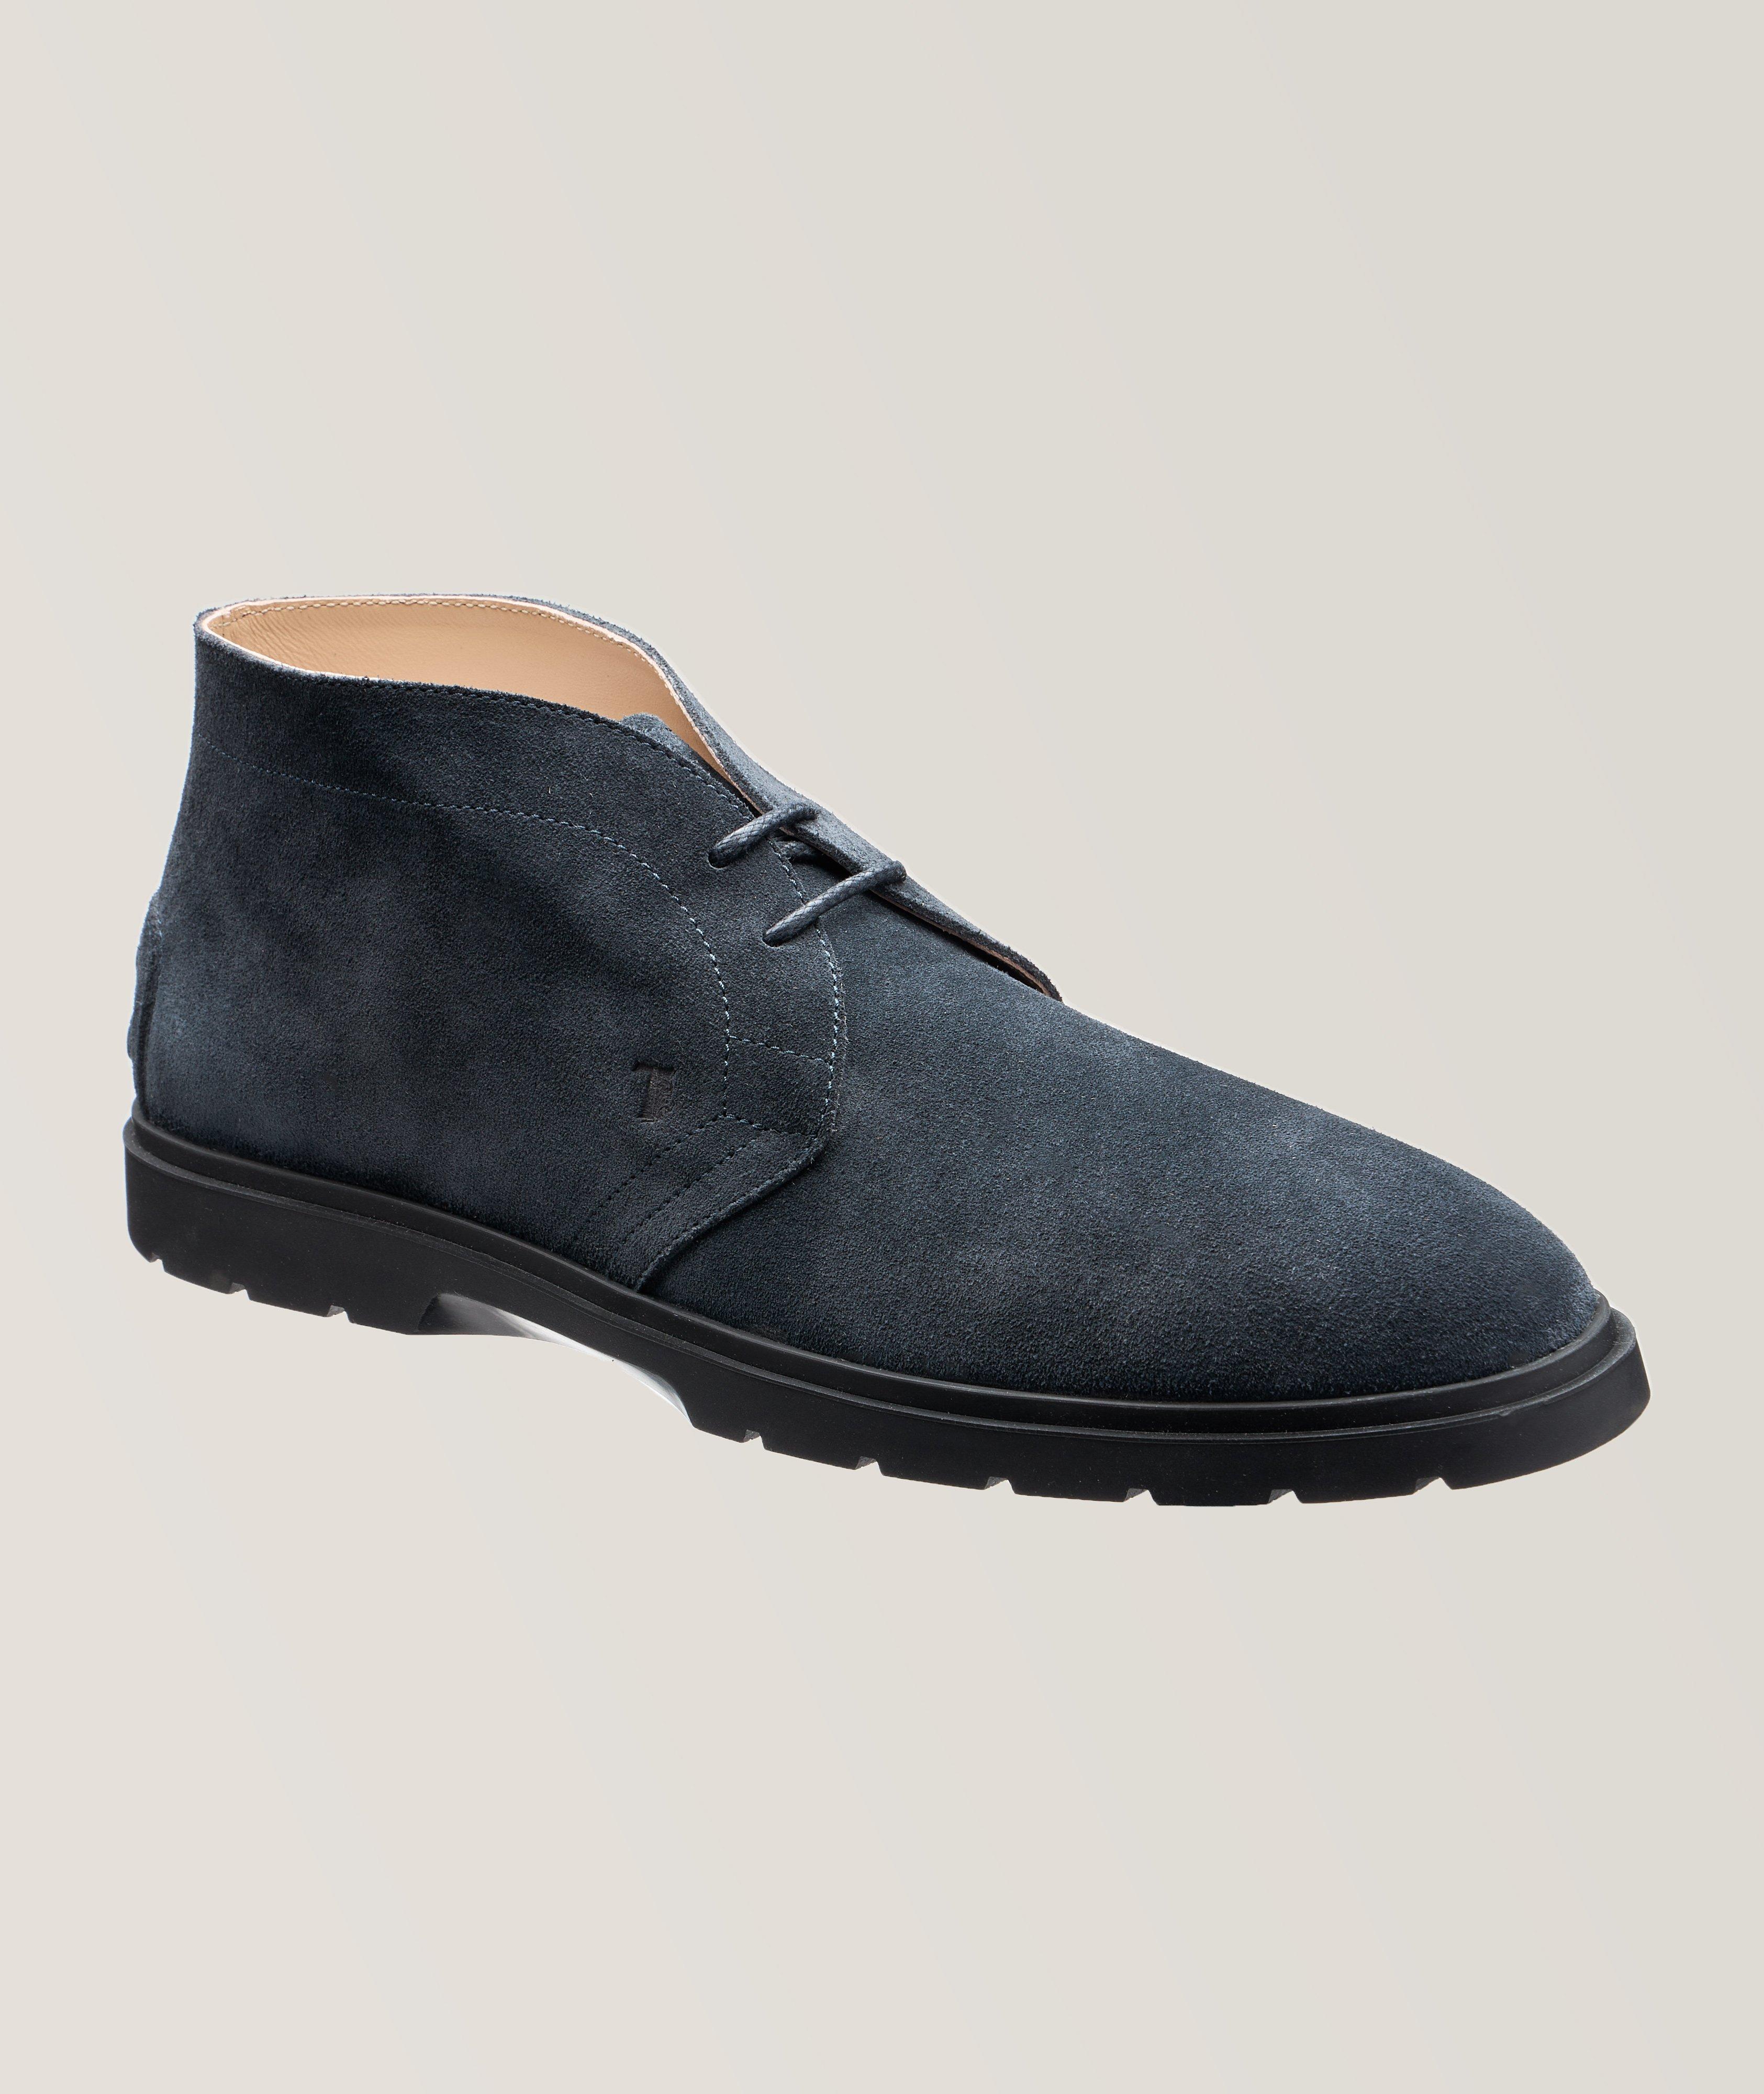 Suede Desert Boots image 0